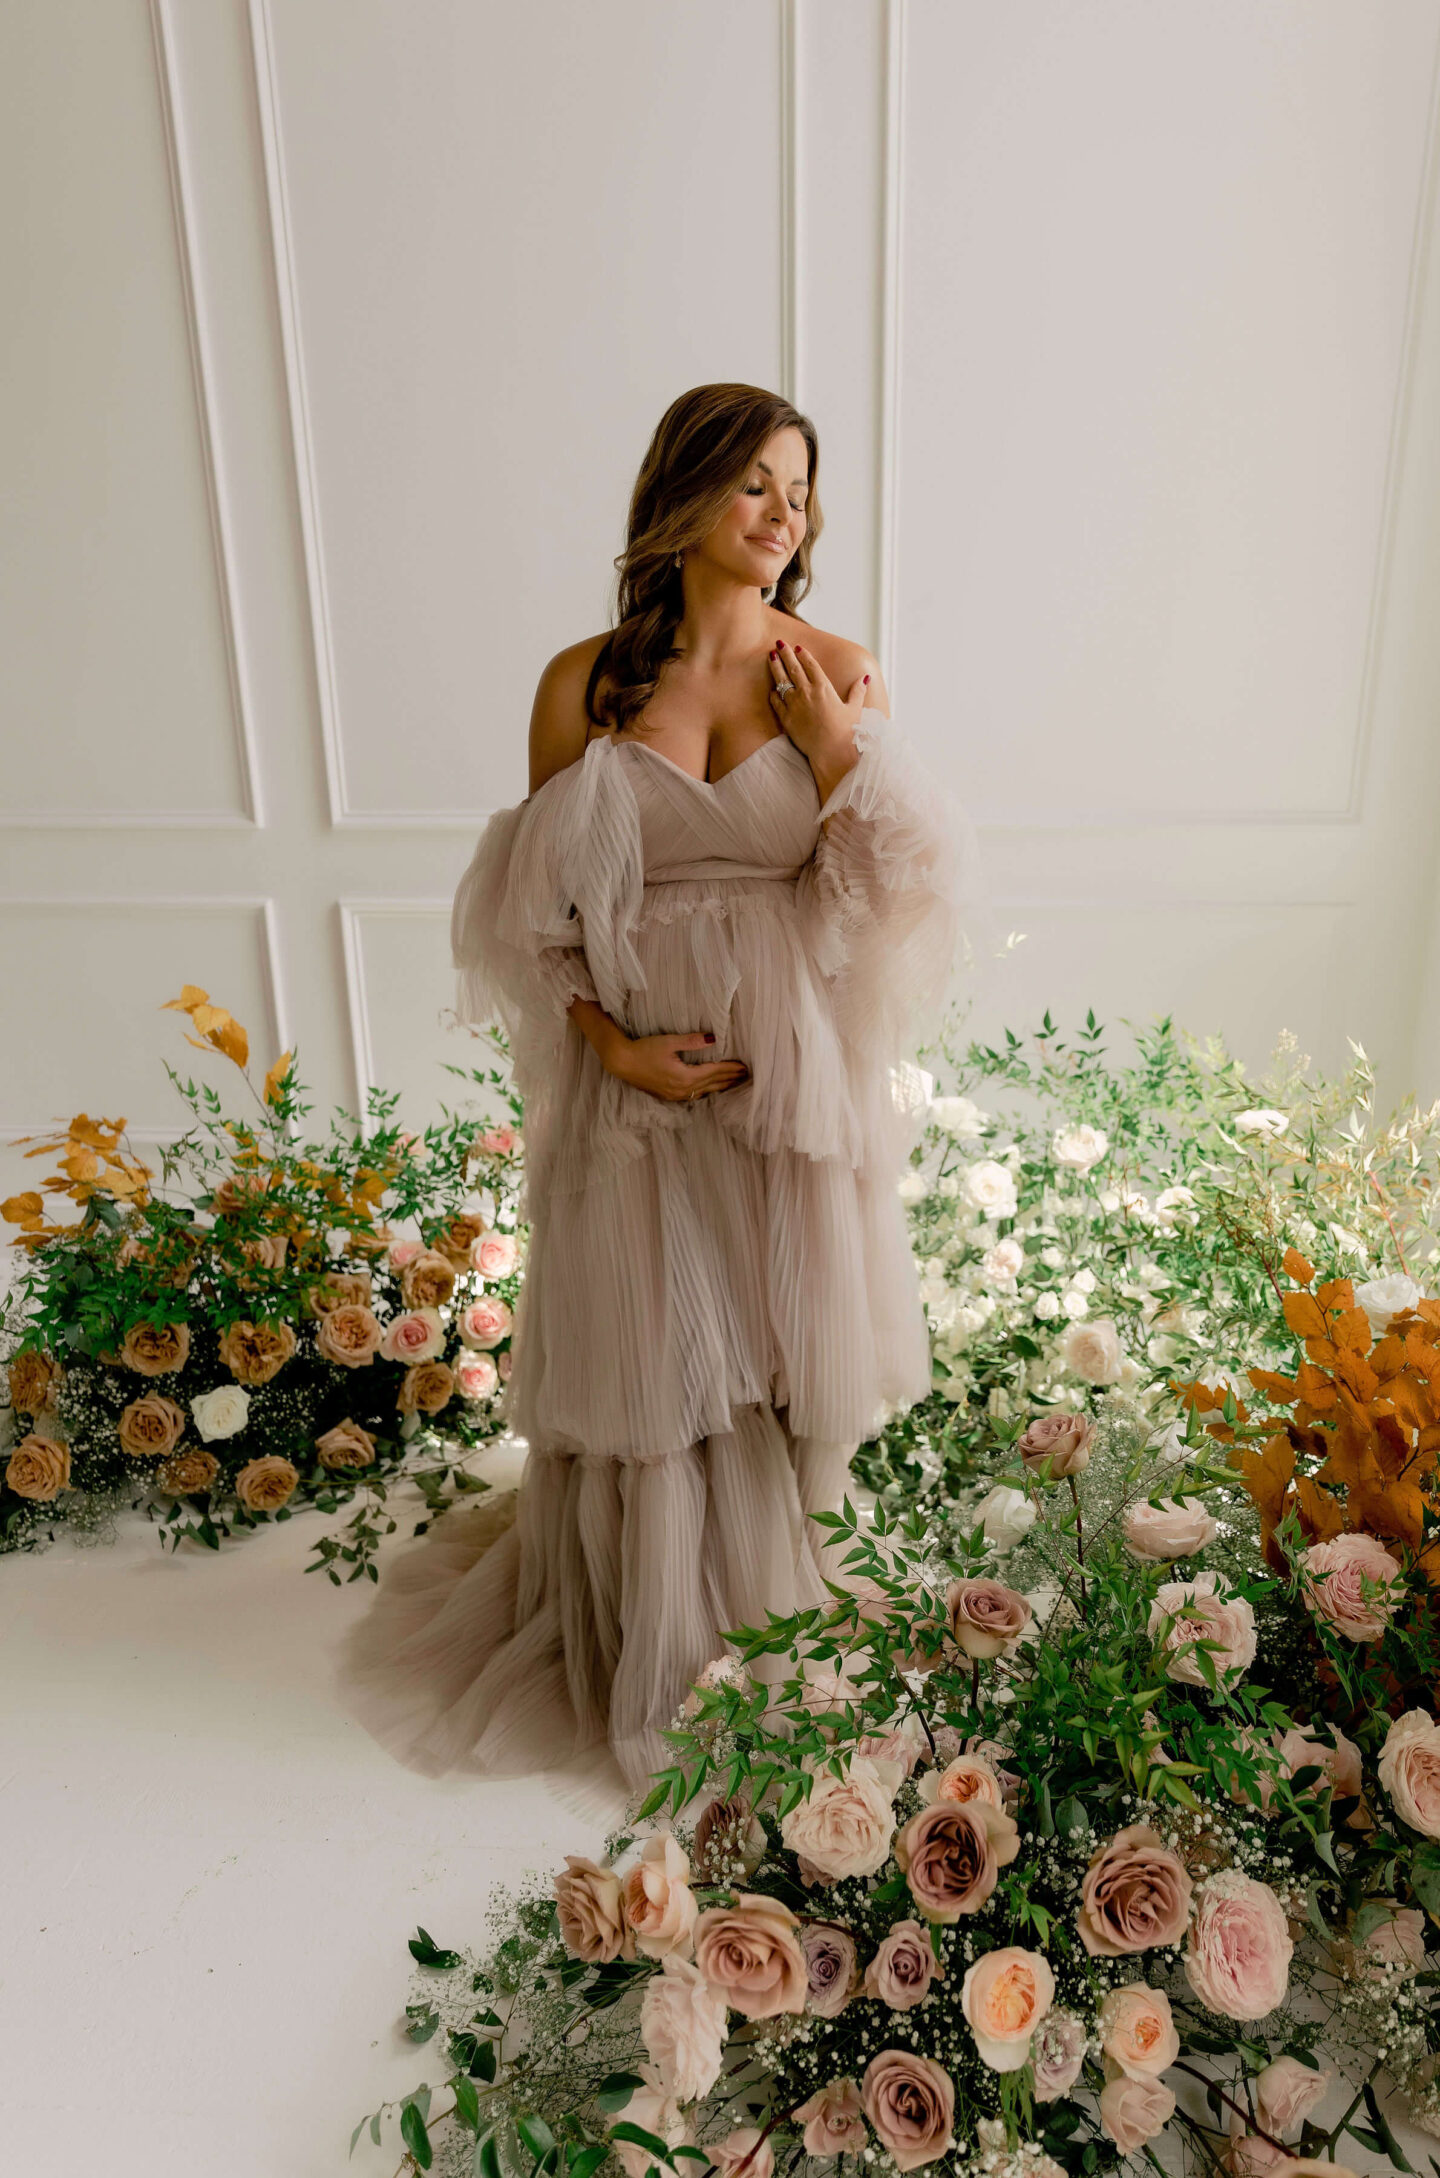 Maternity shoot ideas  Girl maternity pictures, Studio maternity shoot,  Maternity photoshoot outfits